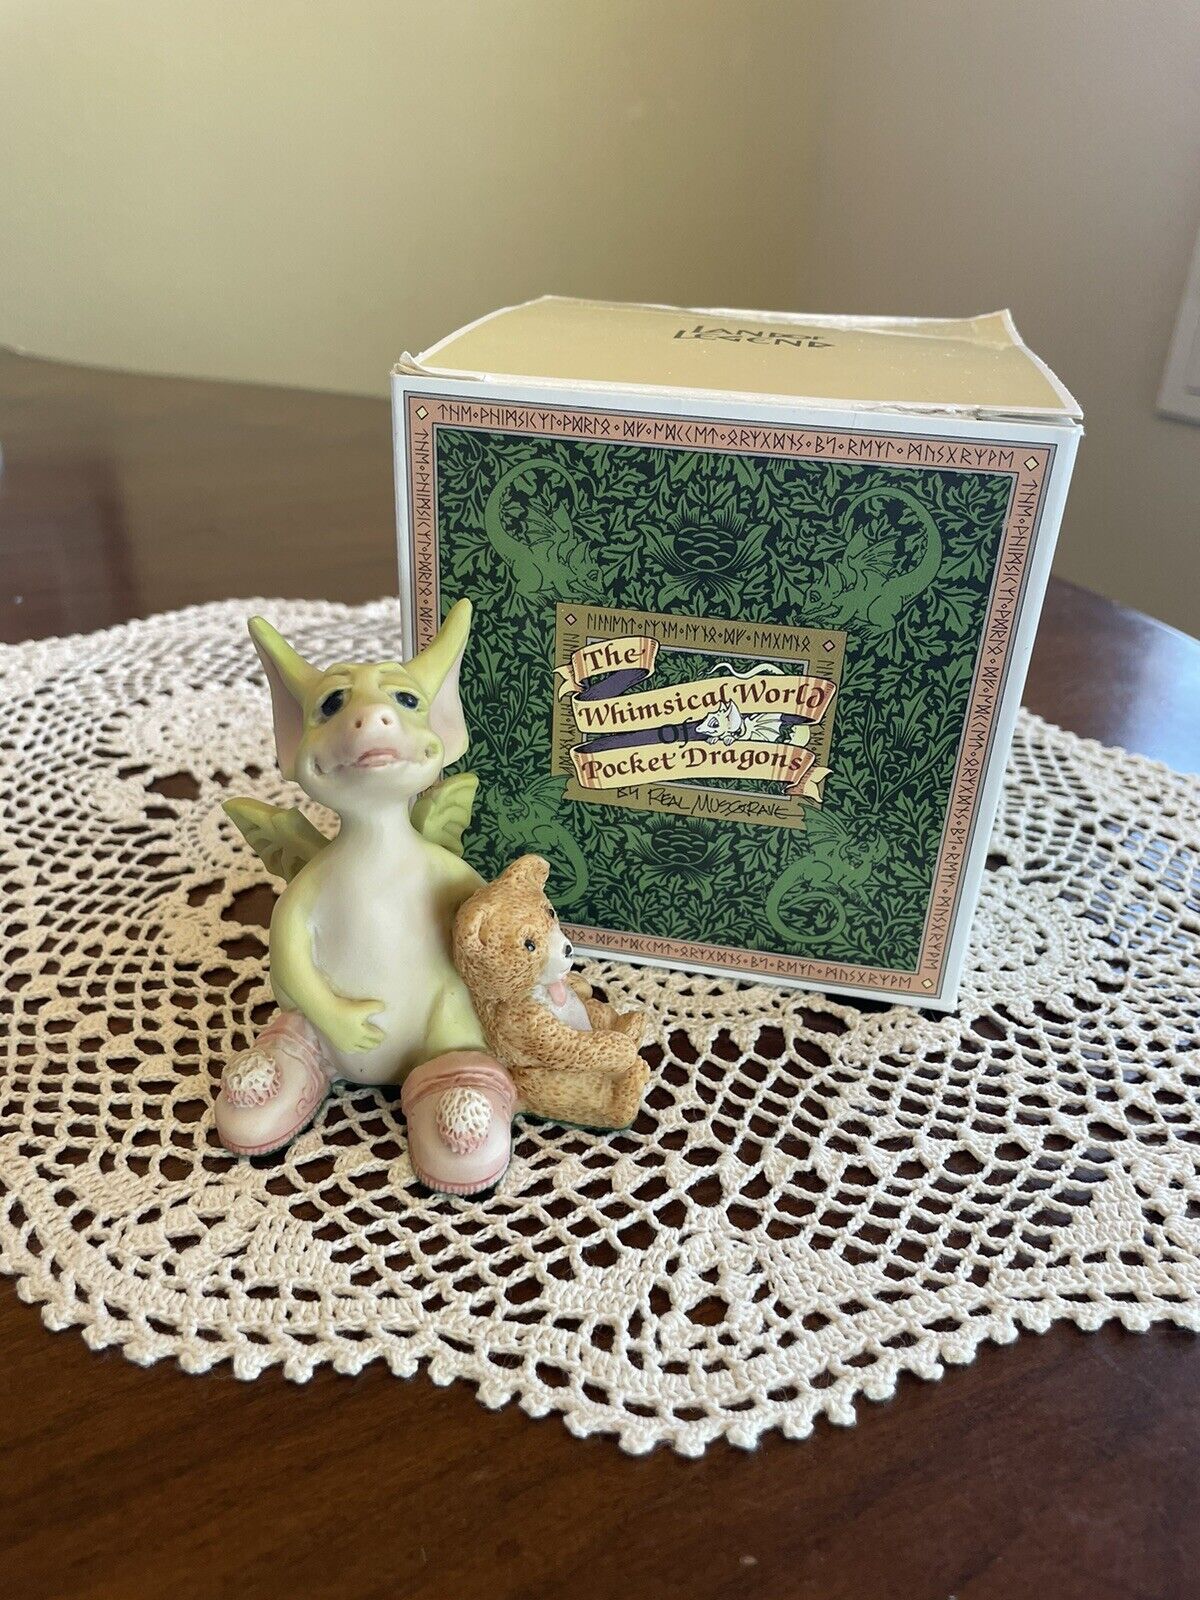 Whimsical World of Pocket Dragons “Drowsy Dragon” 1989 Figurine Real Musgrave